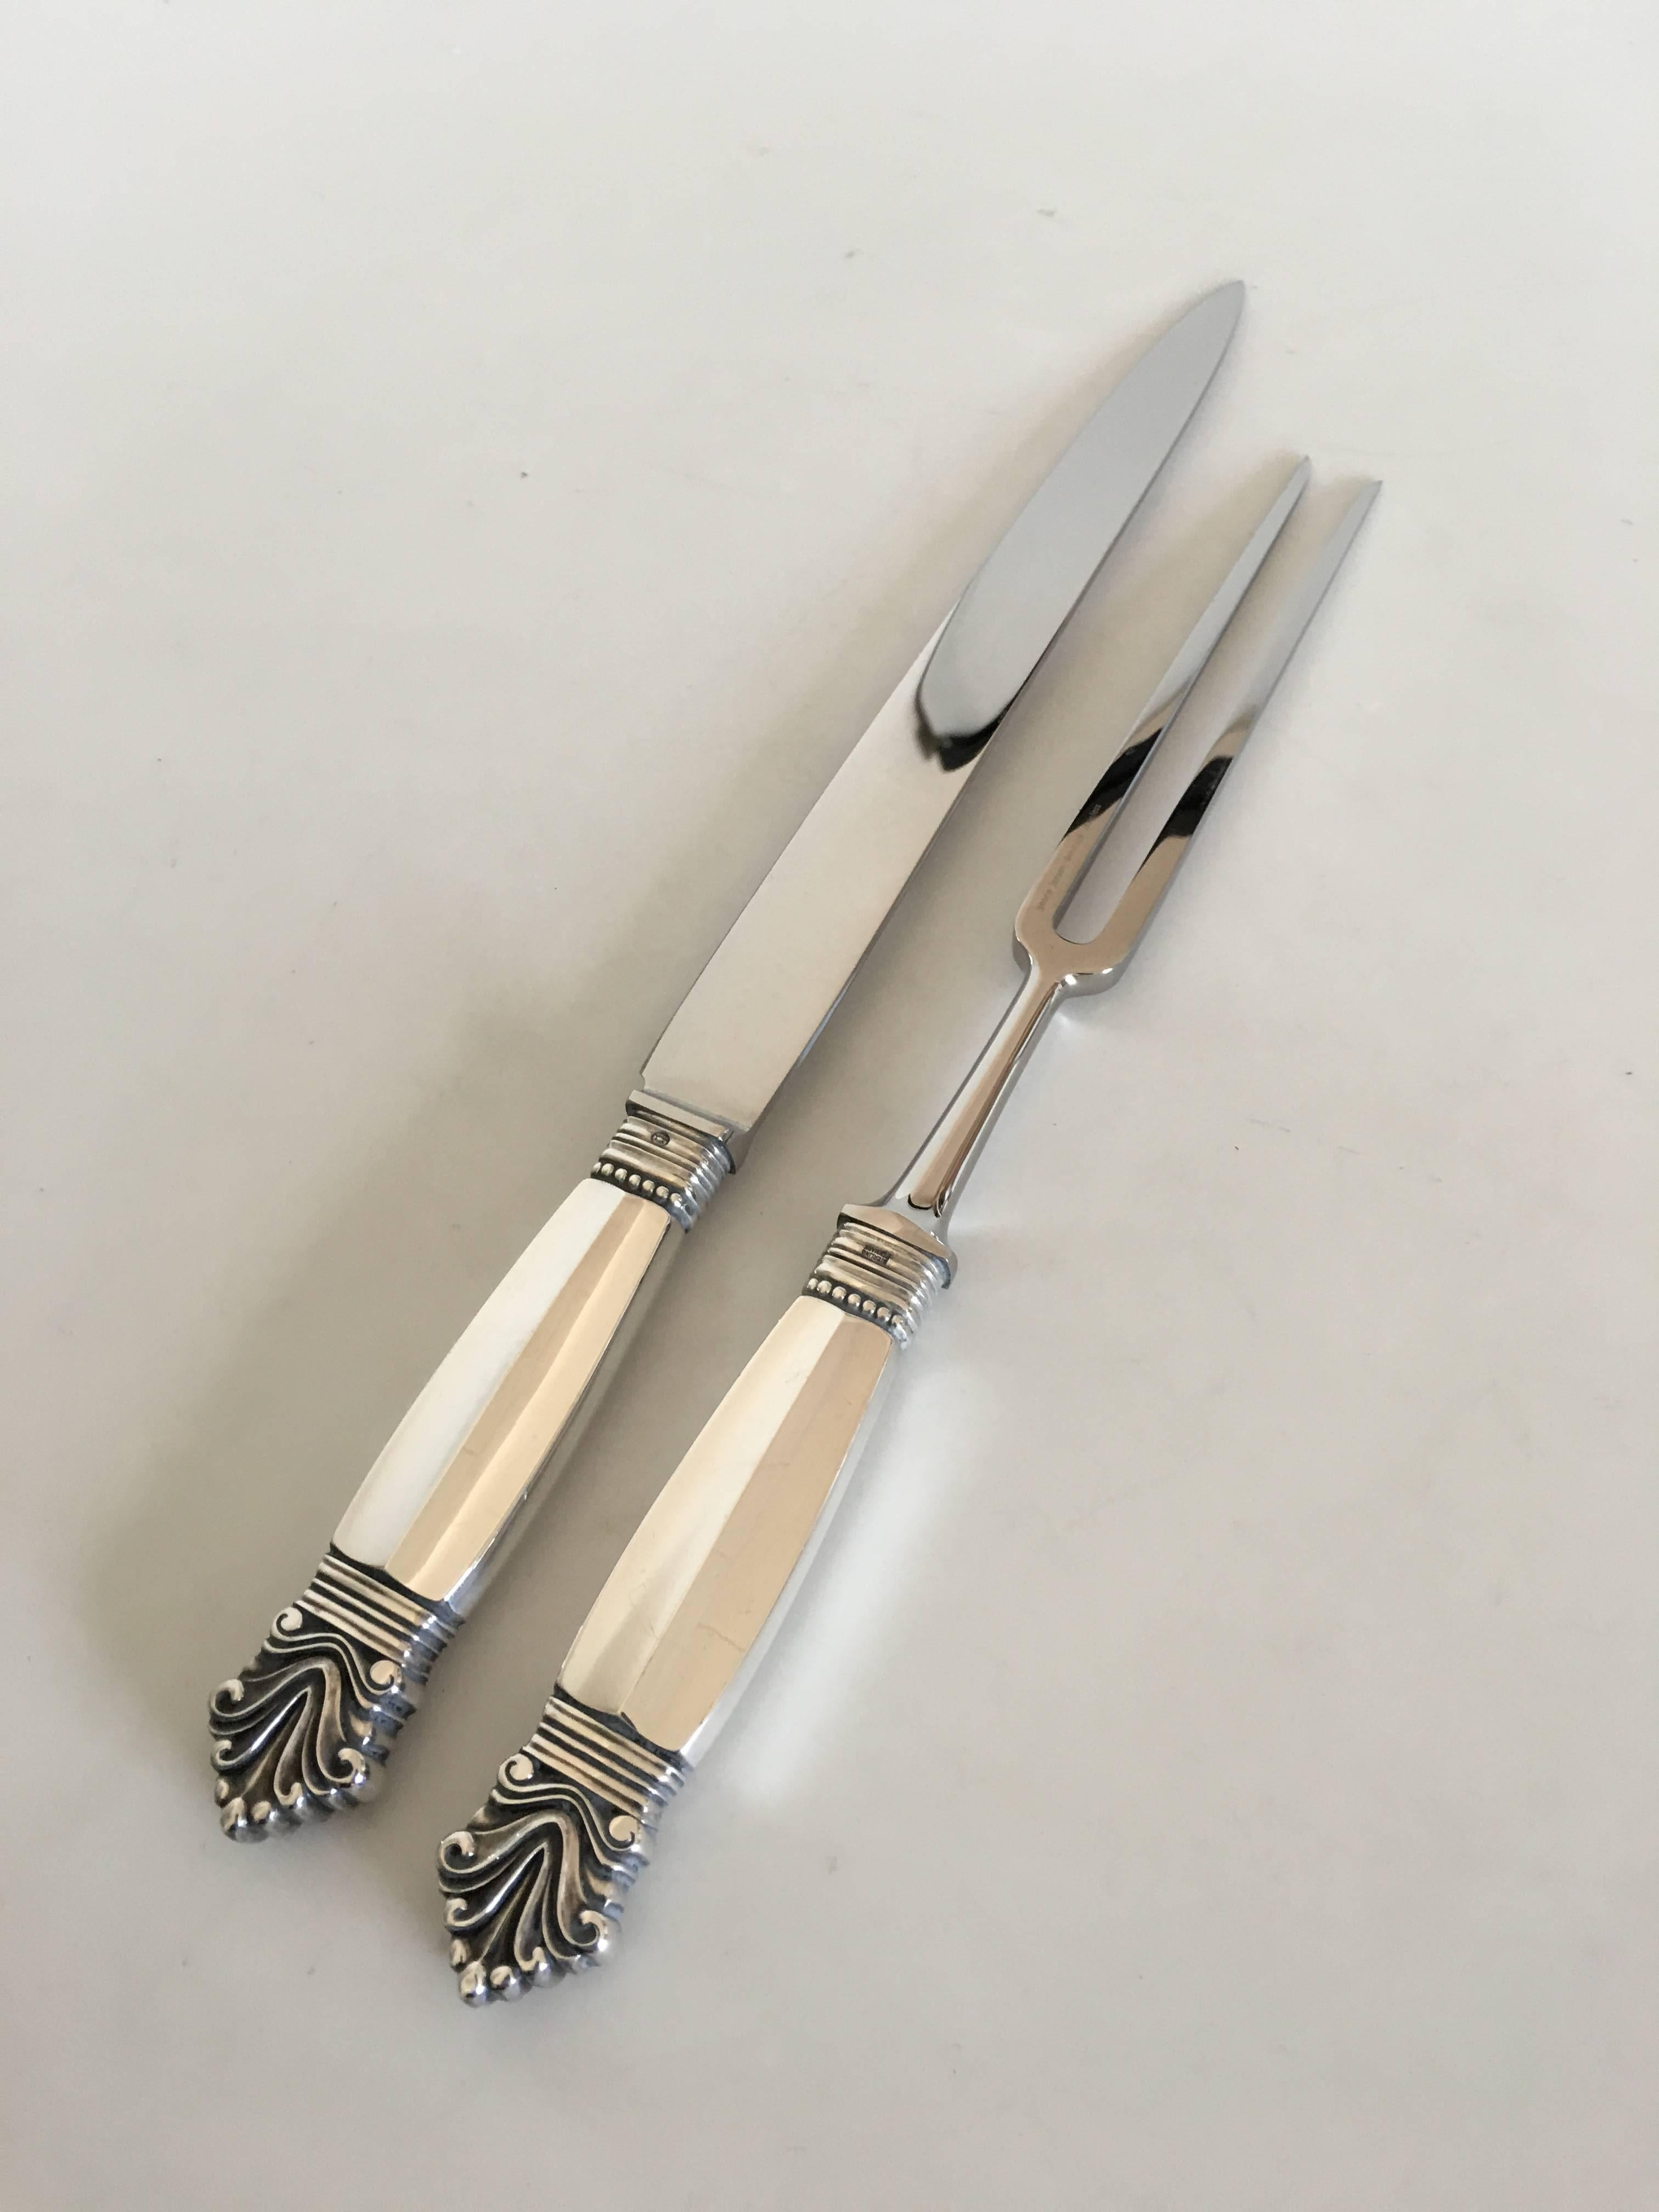 Georg Jensen acanthus carving set in sterling silver and stainless steel. 31 and 34.5 cm L (12 13/64